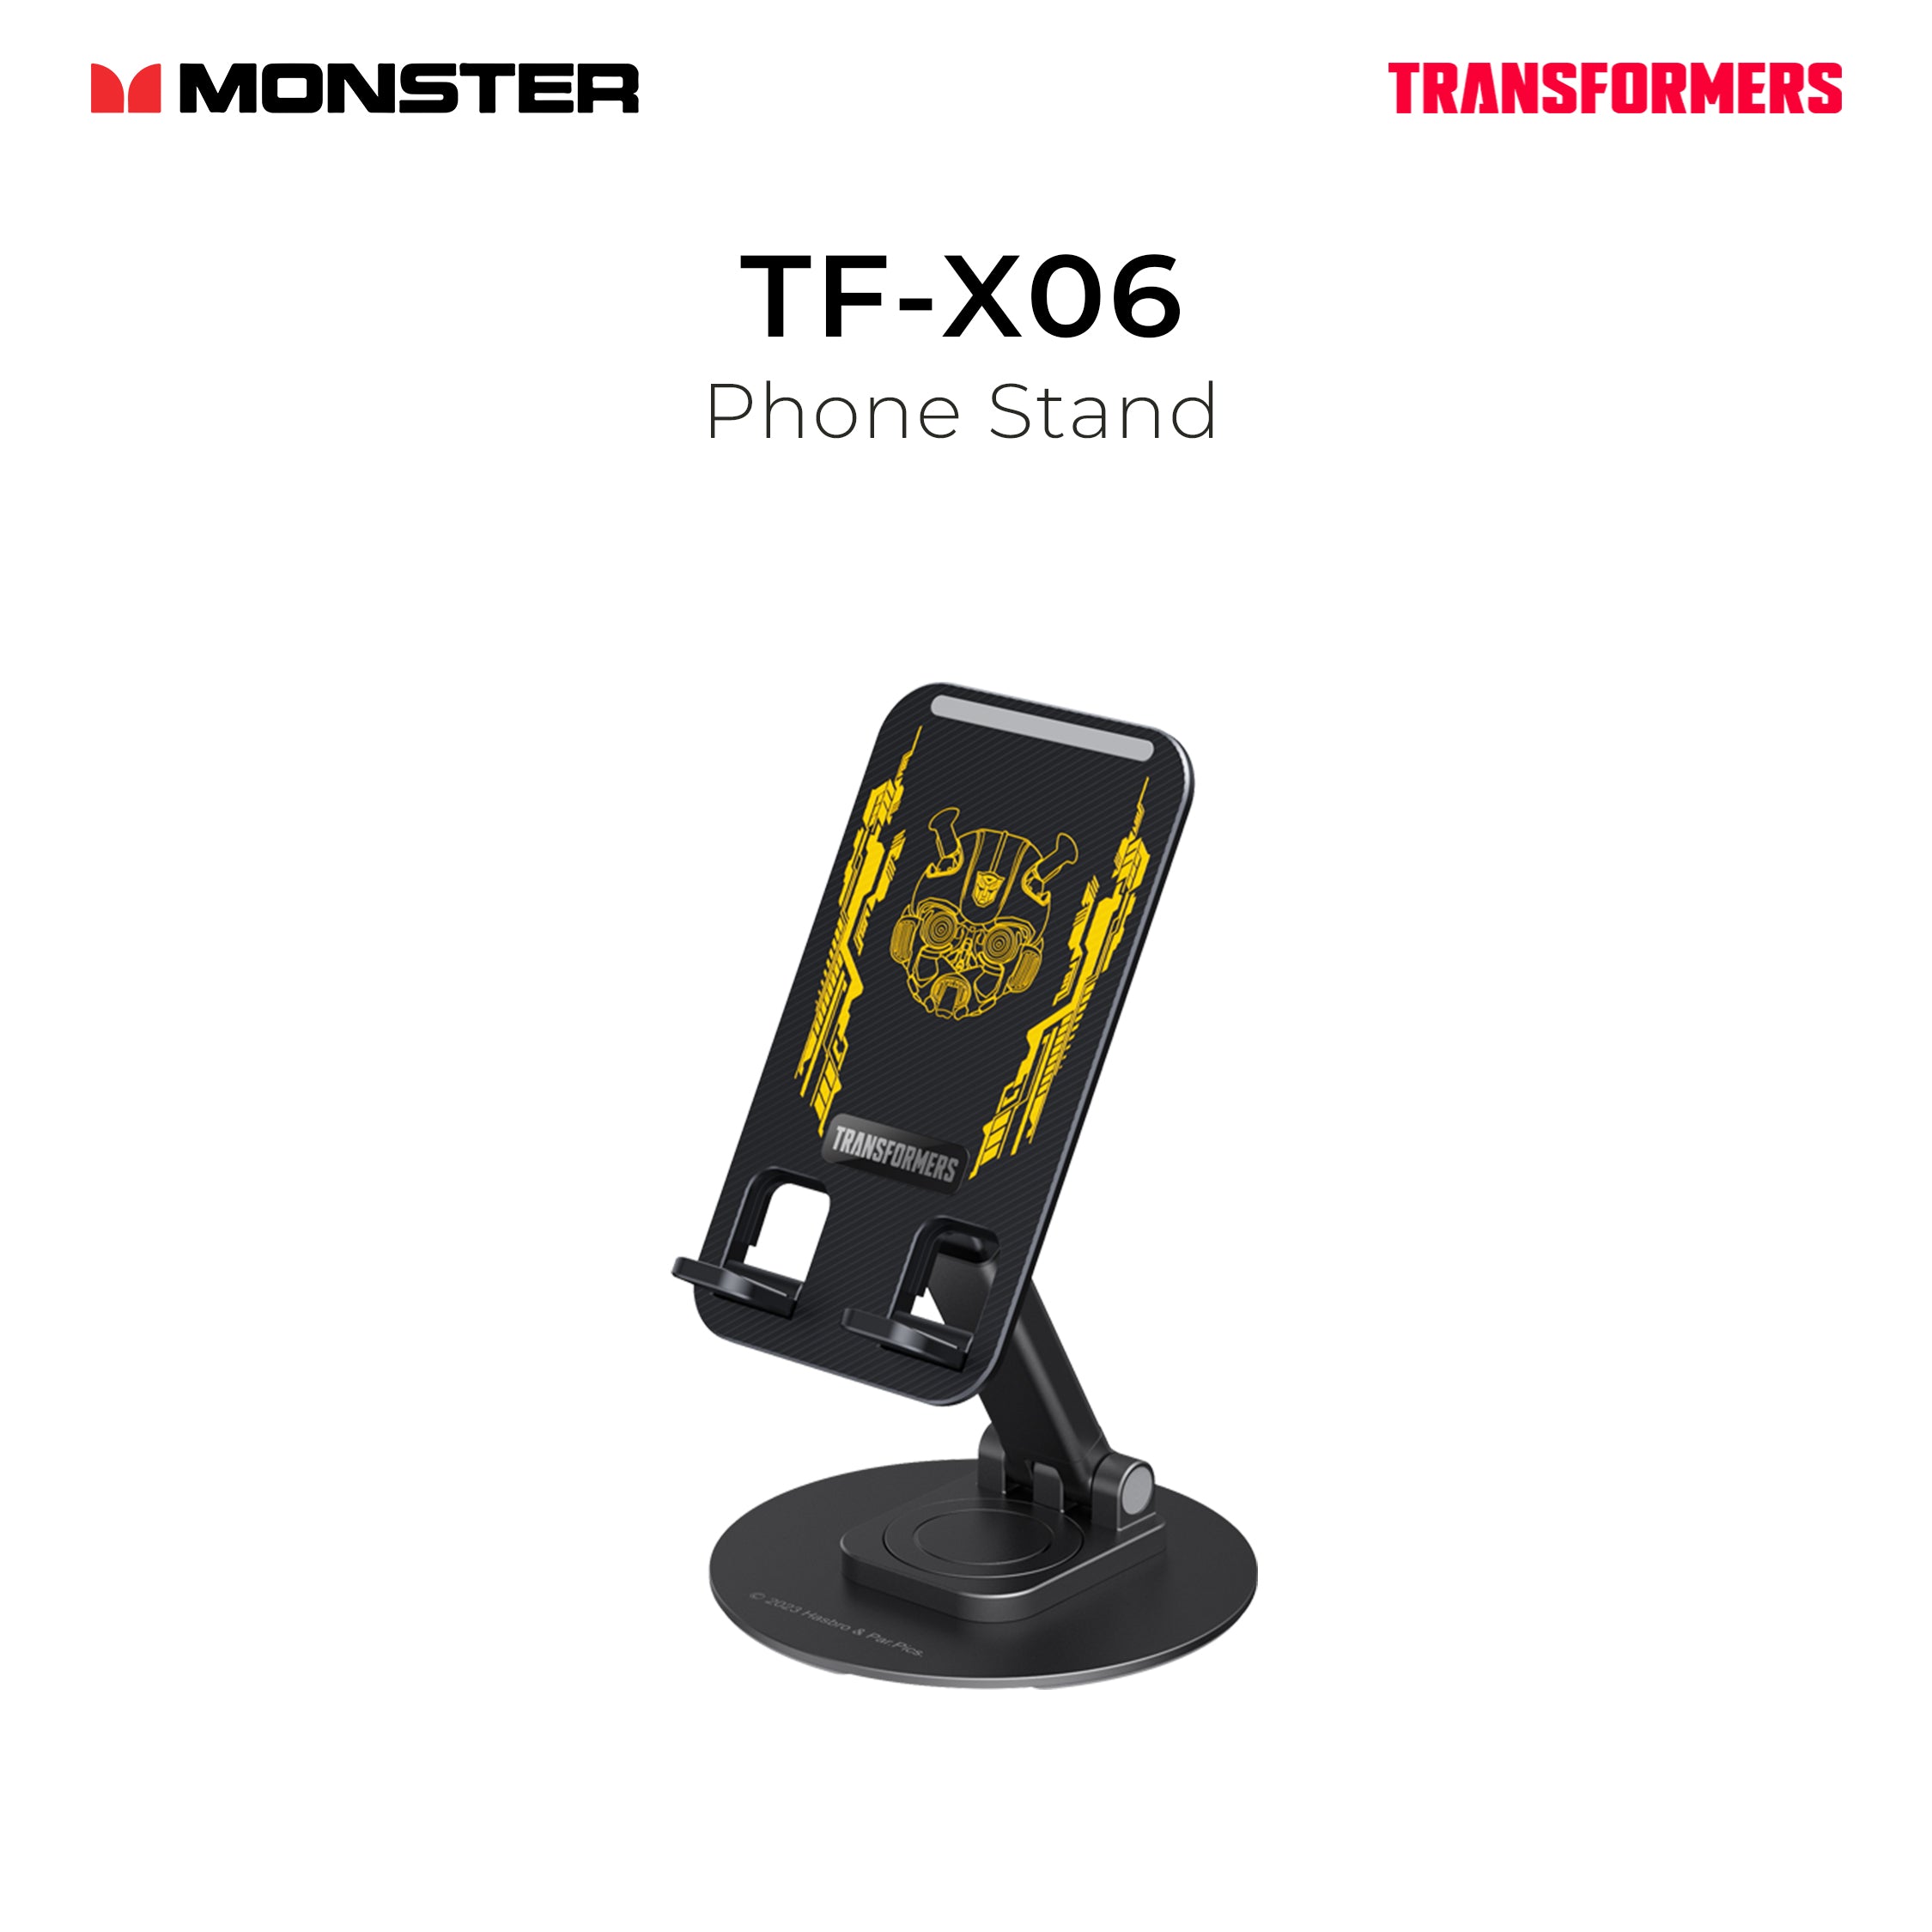 Monster Transformers Phone Stand TF-X06